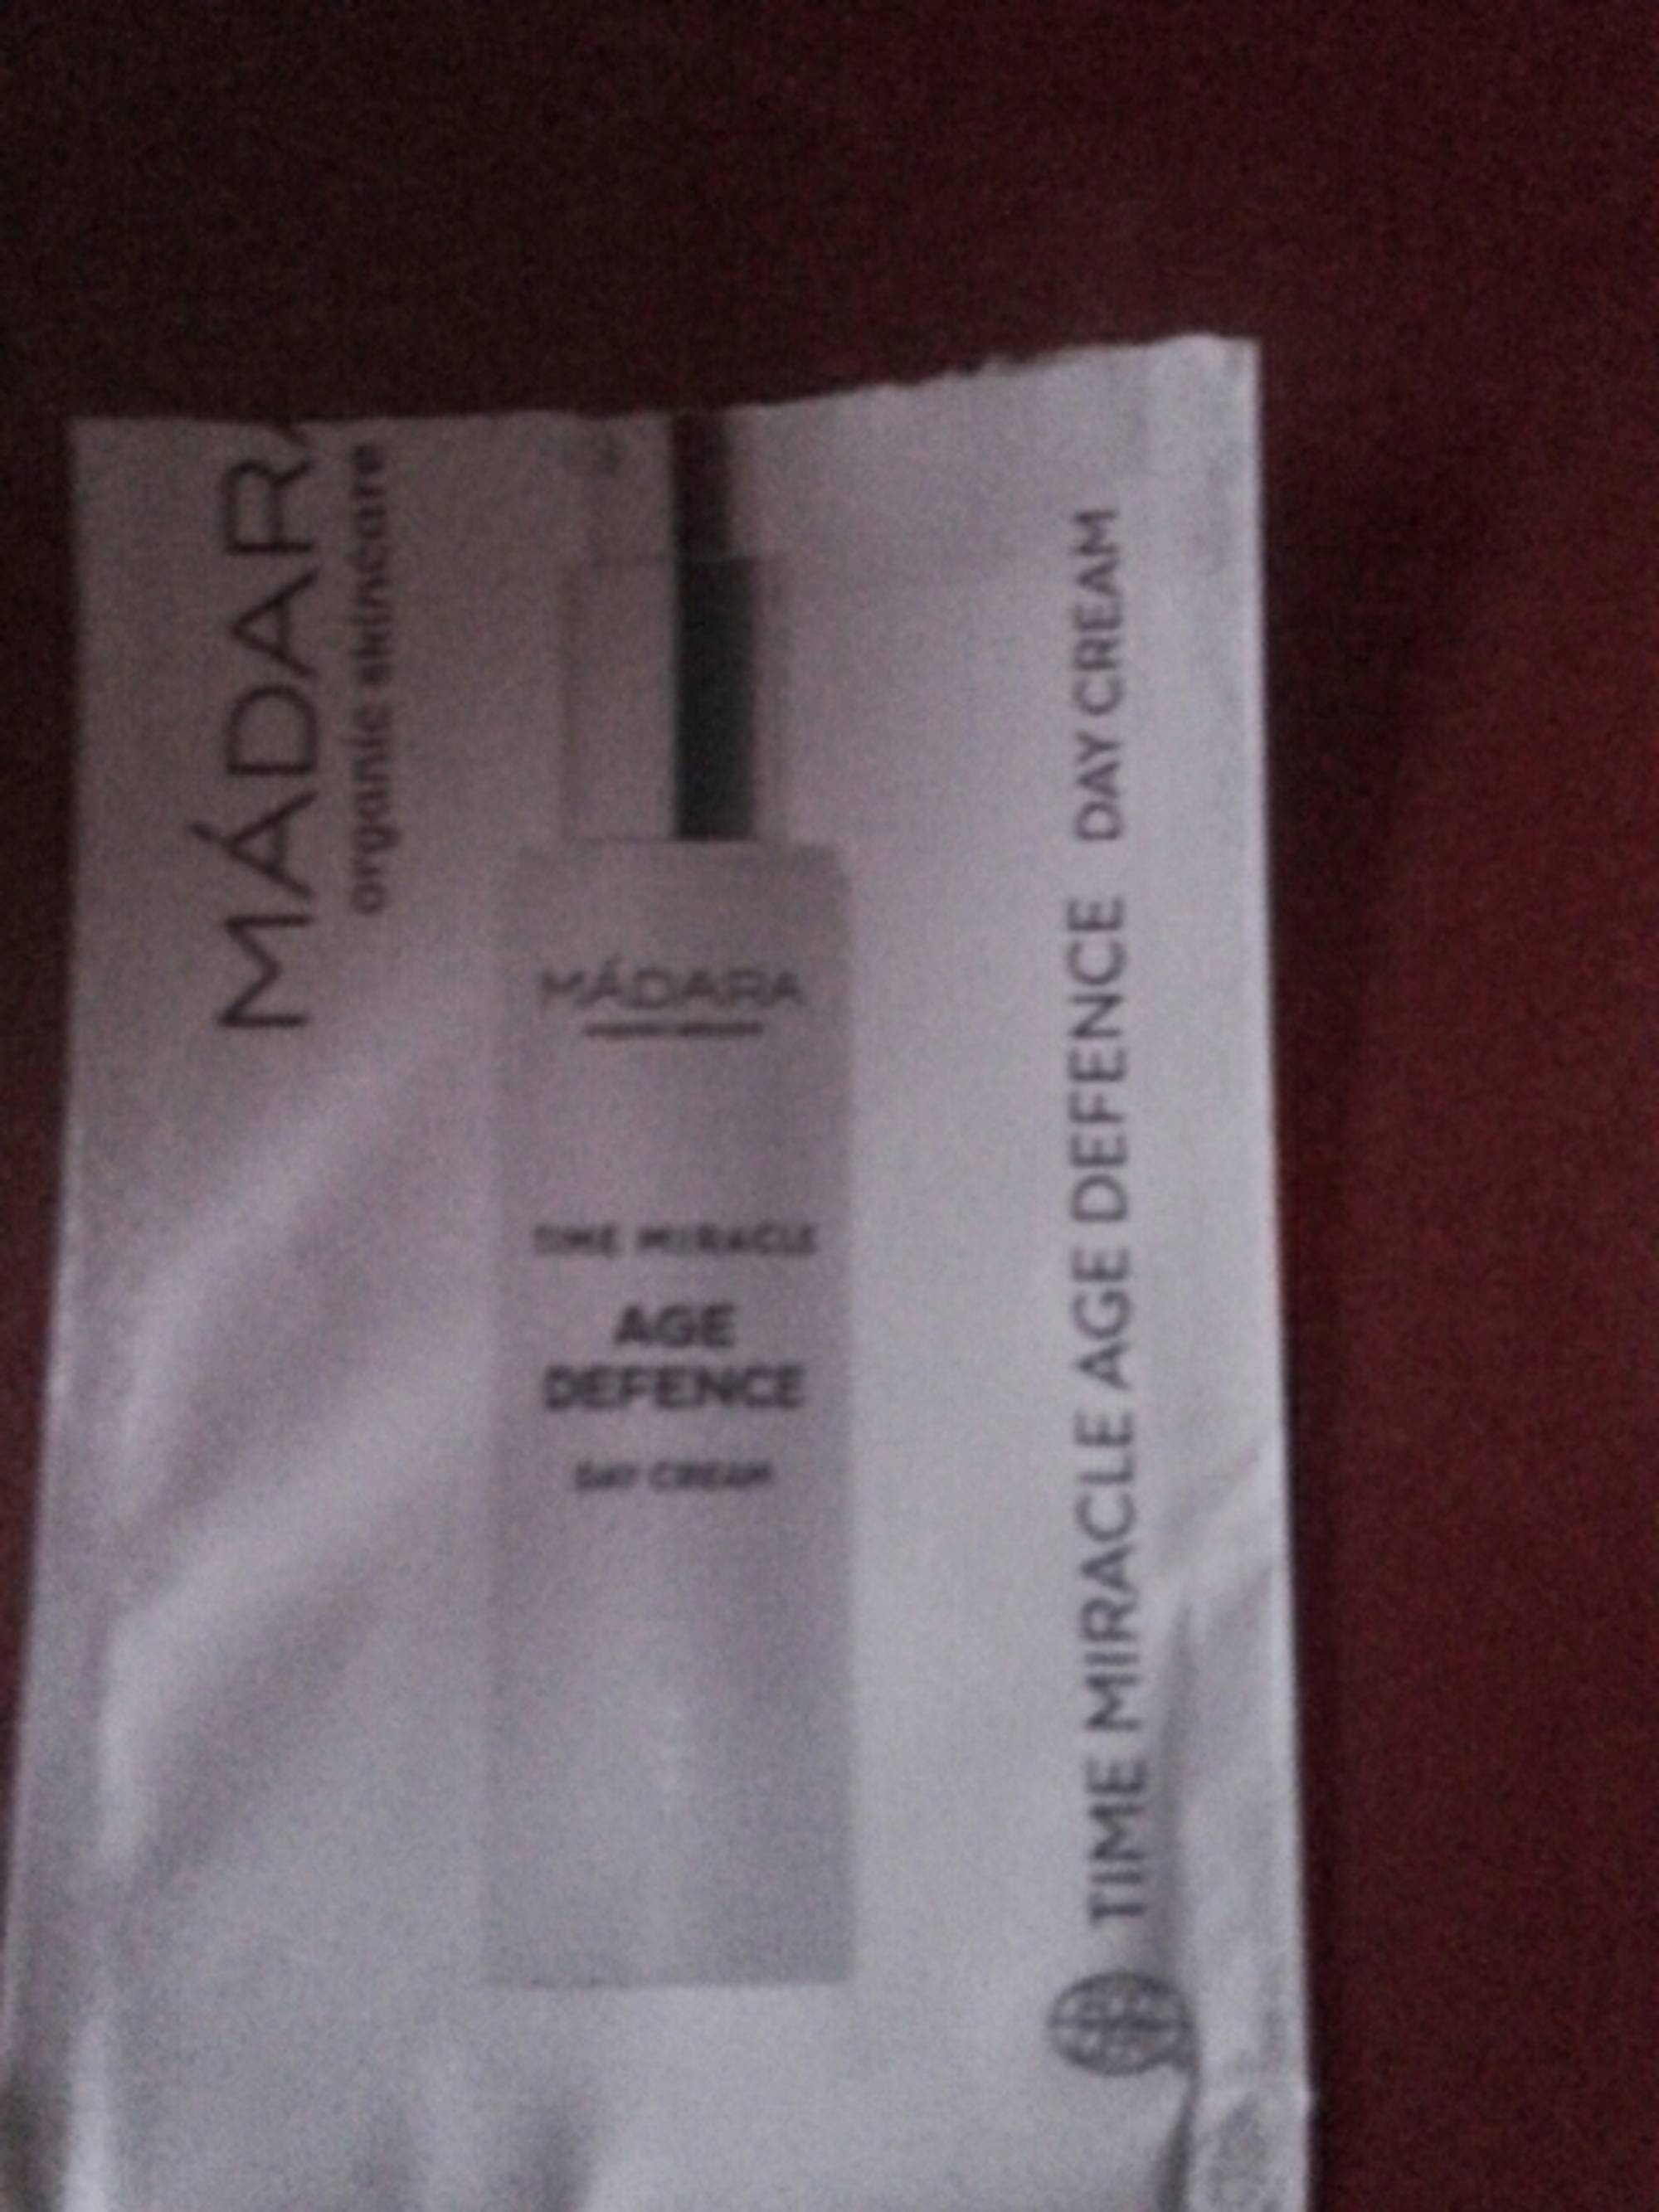 MÁDARA - Time miracle age defence - Day cream